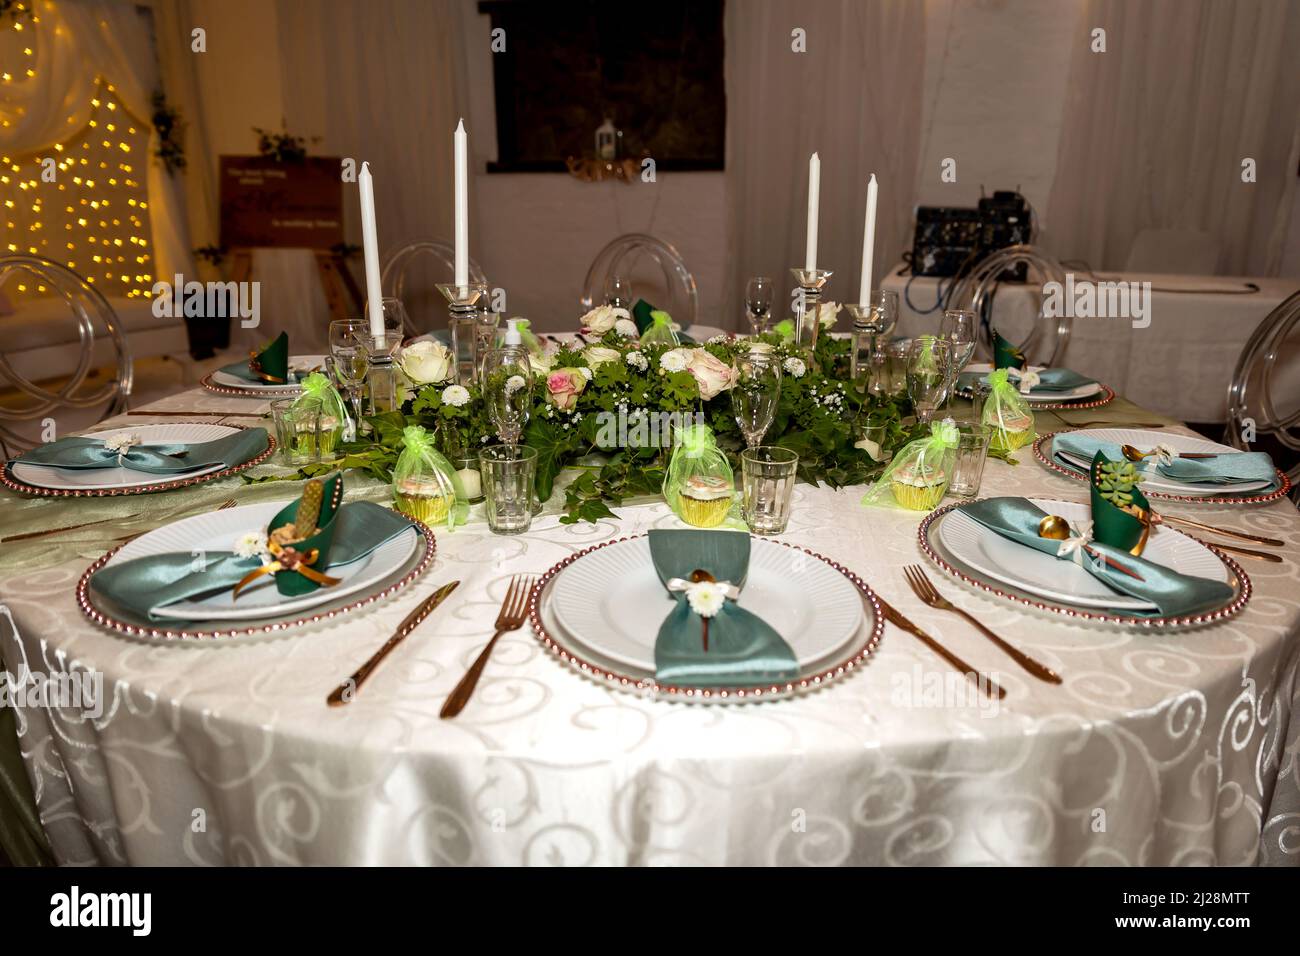 Green and Gold Theme Table setting and decorations Stock Photo - Alamy